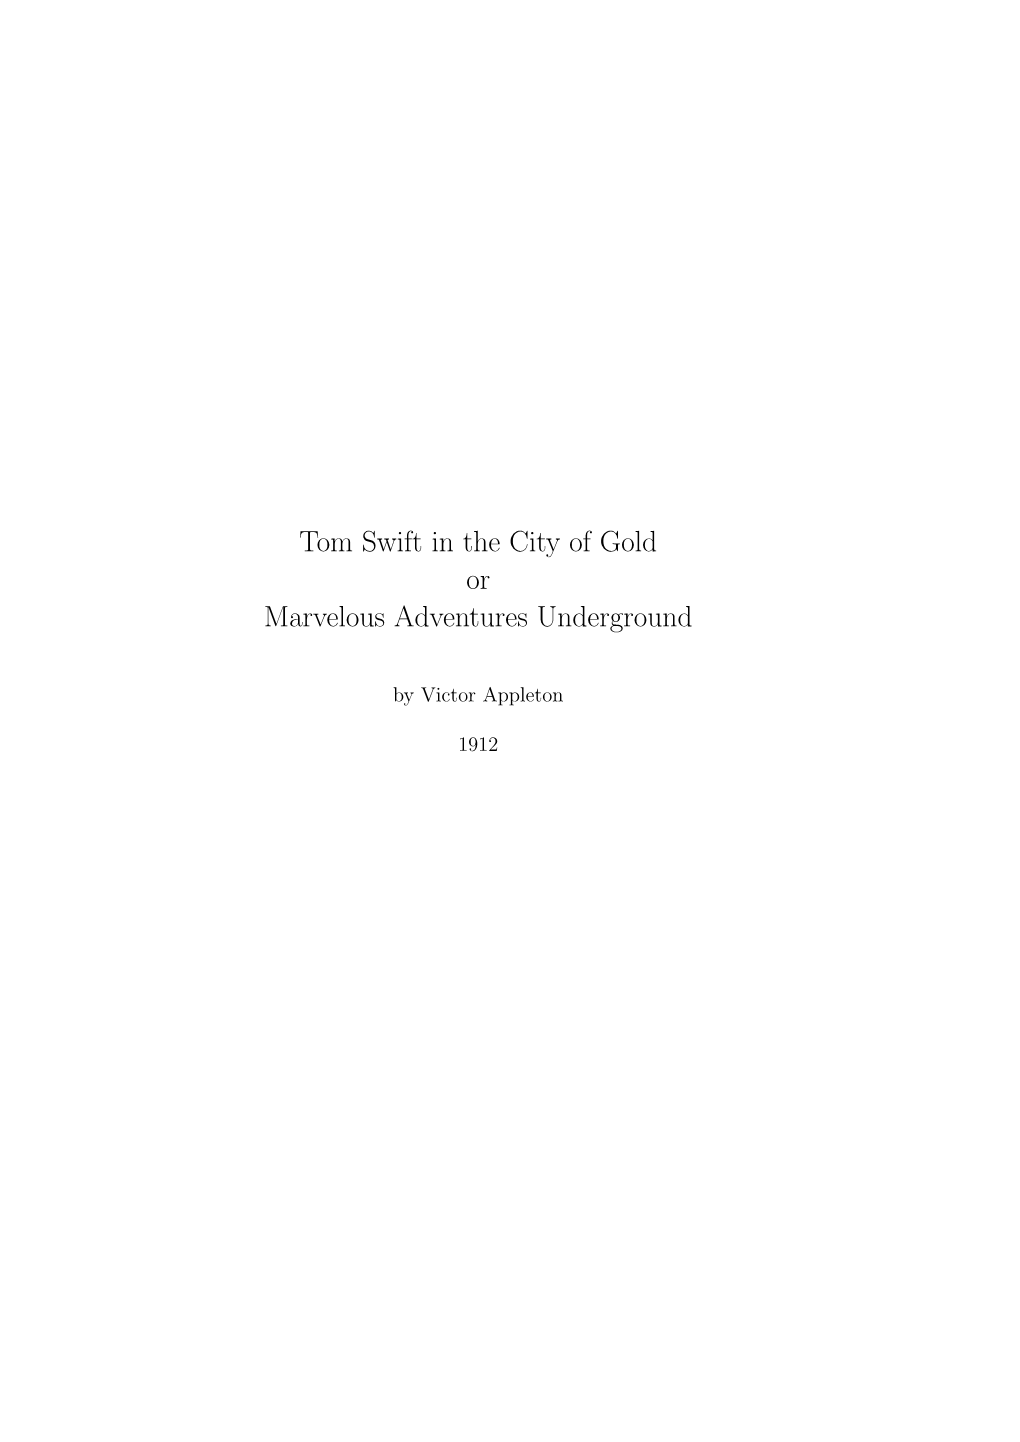 Tom Swift in the City of Gold Or Marvelous Adventures Underground